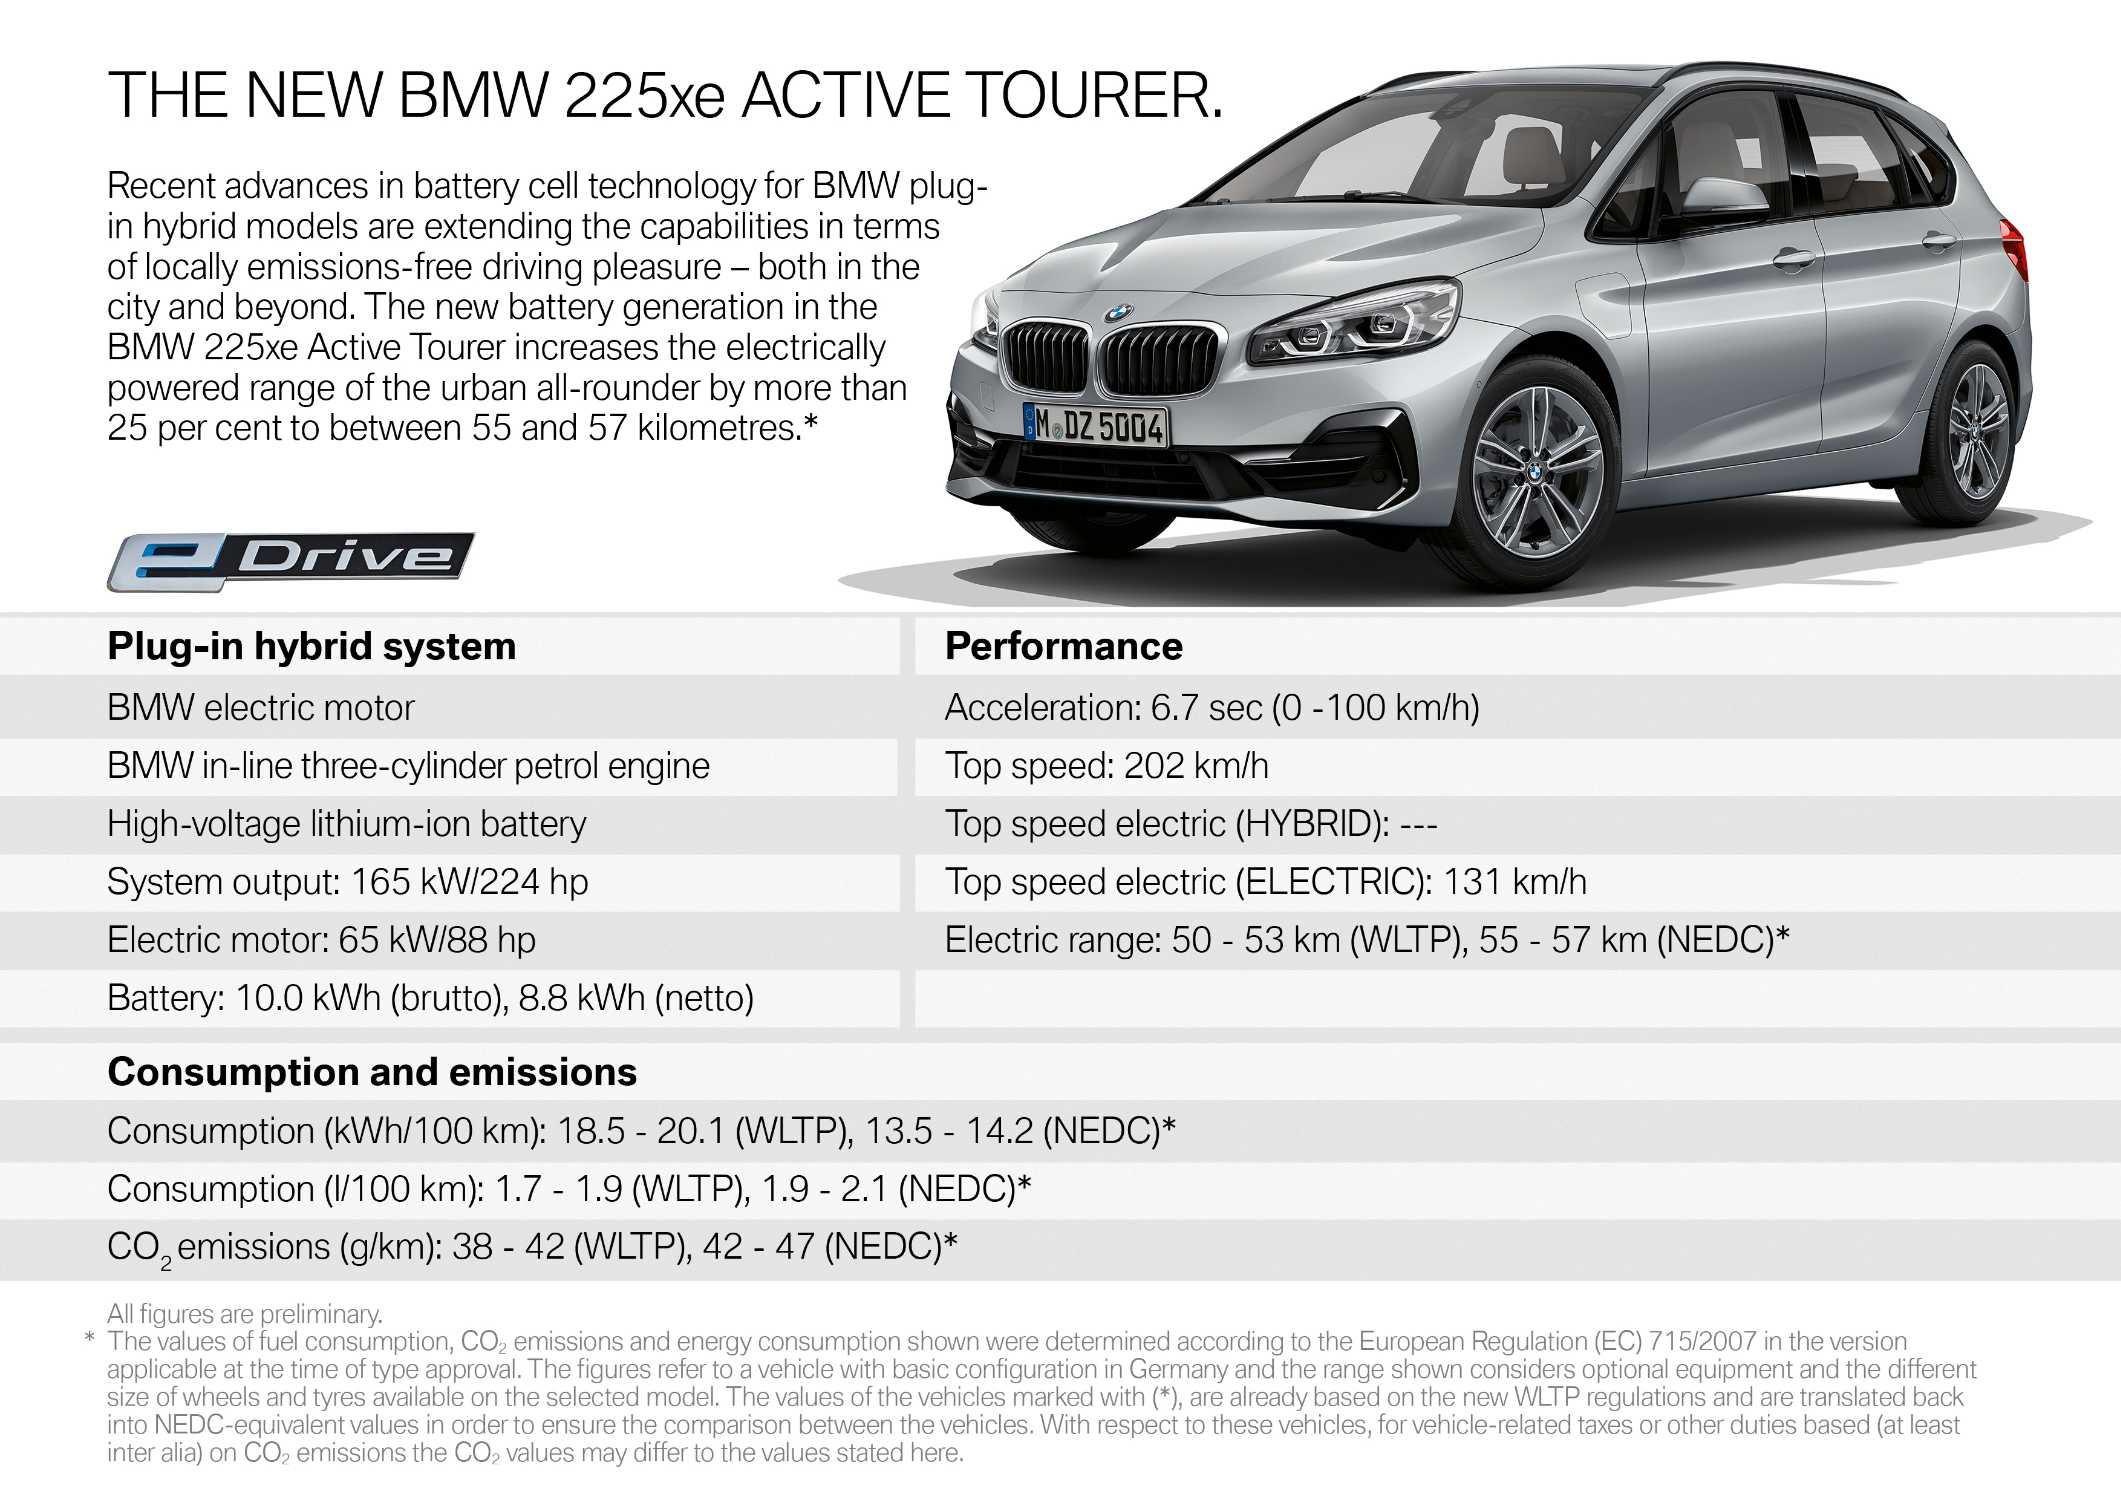 The new BMW 225xe Active Tourer (08/2019).